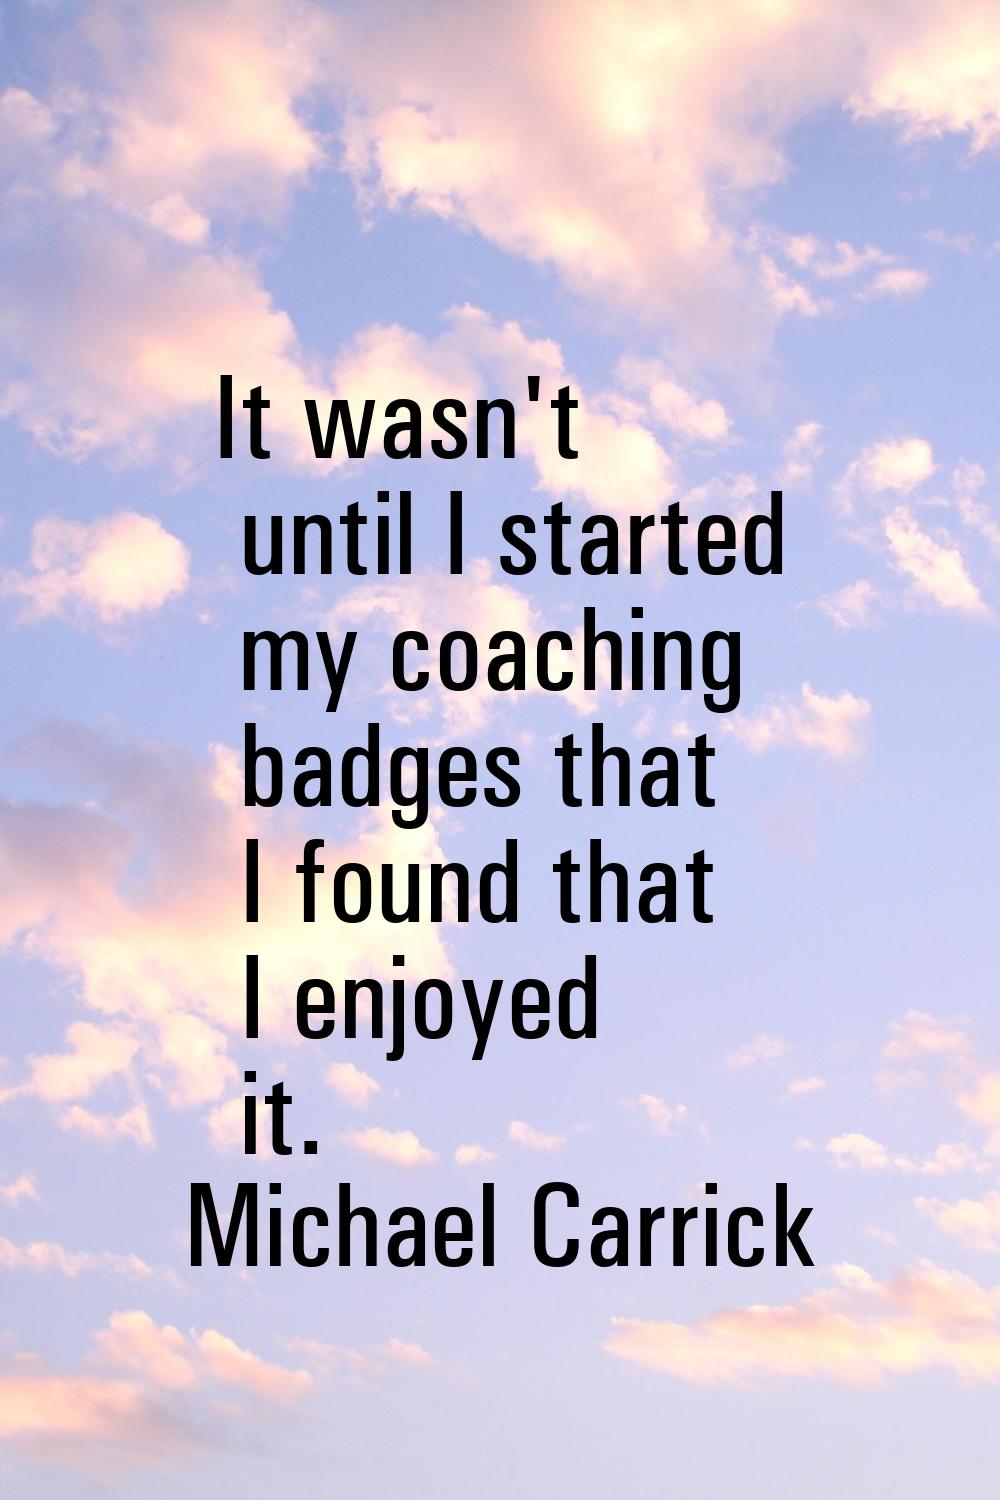 It wasn't until I started my coaching badges that I found that I enjoyed it.